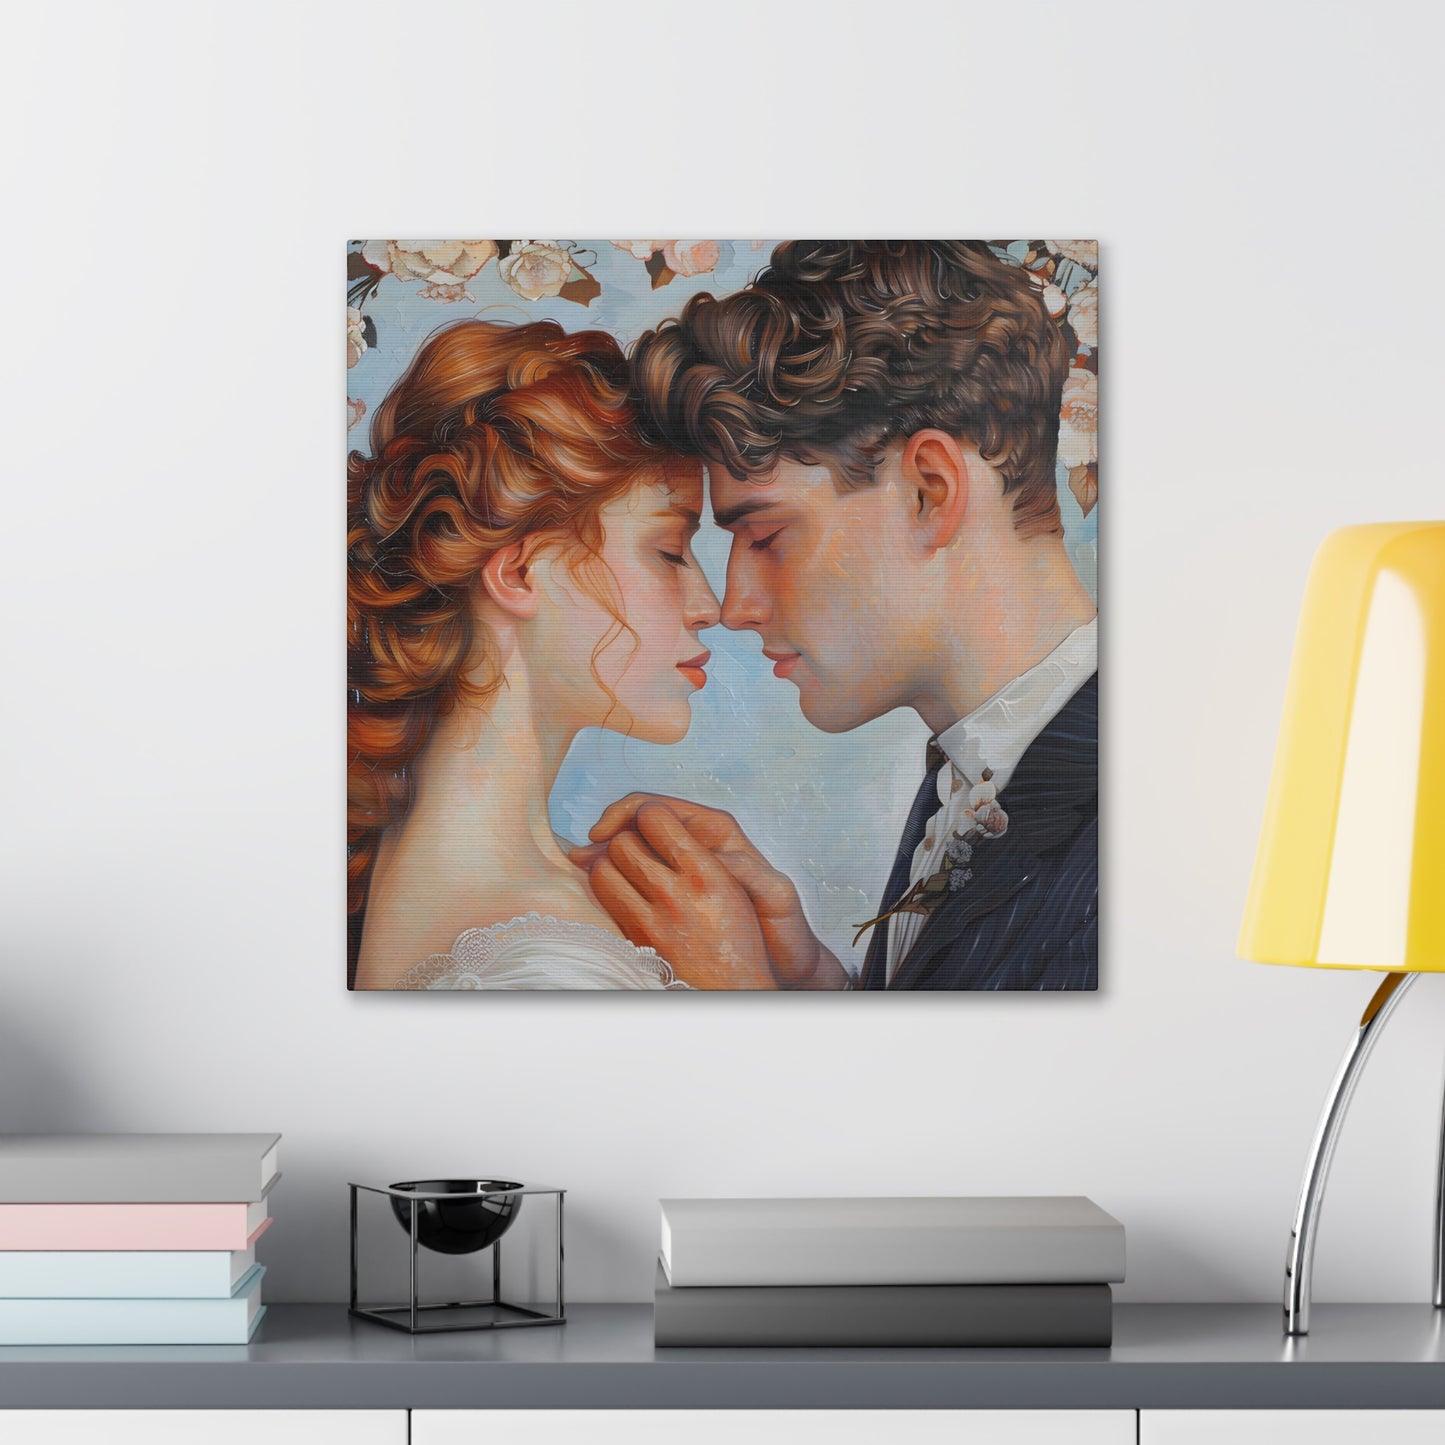 Evelyn Romantique, Intertwined Souls, Exclusive Canvas Print